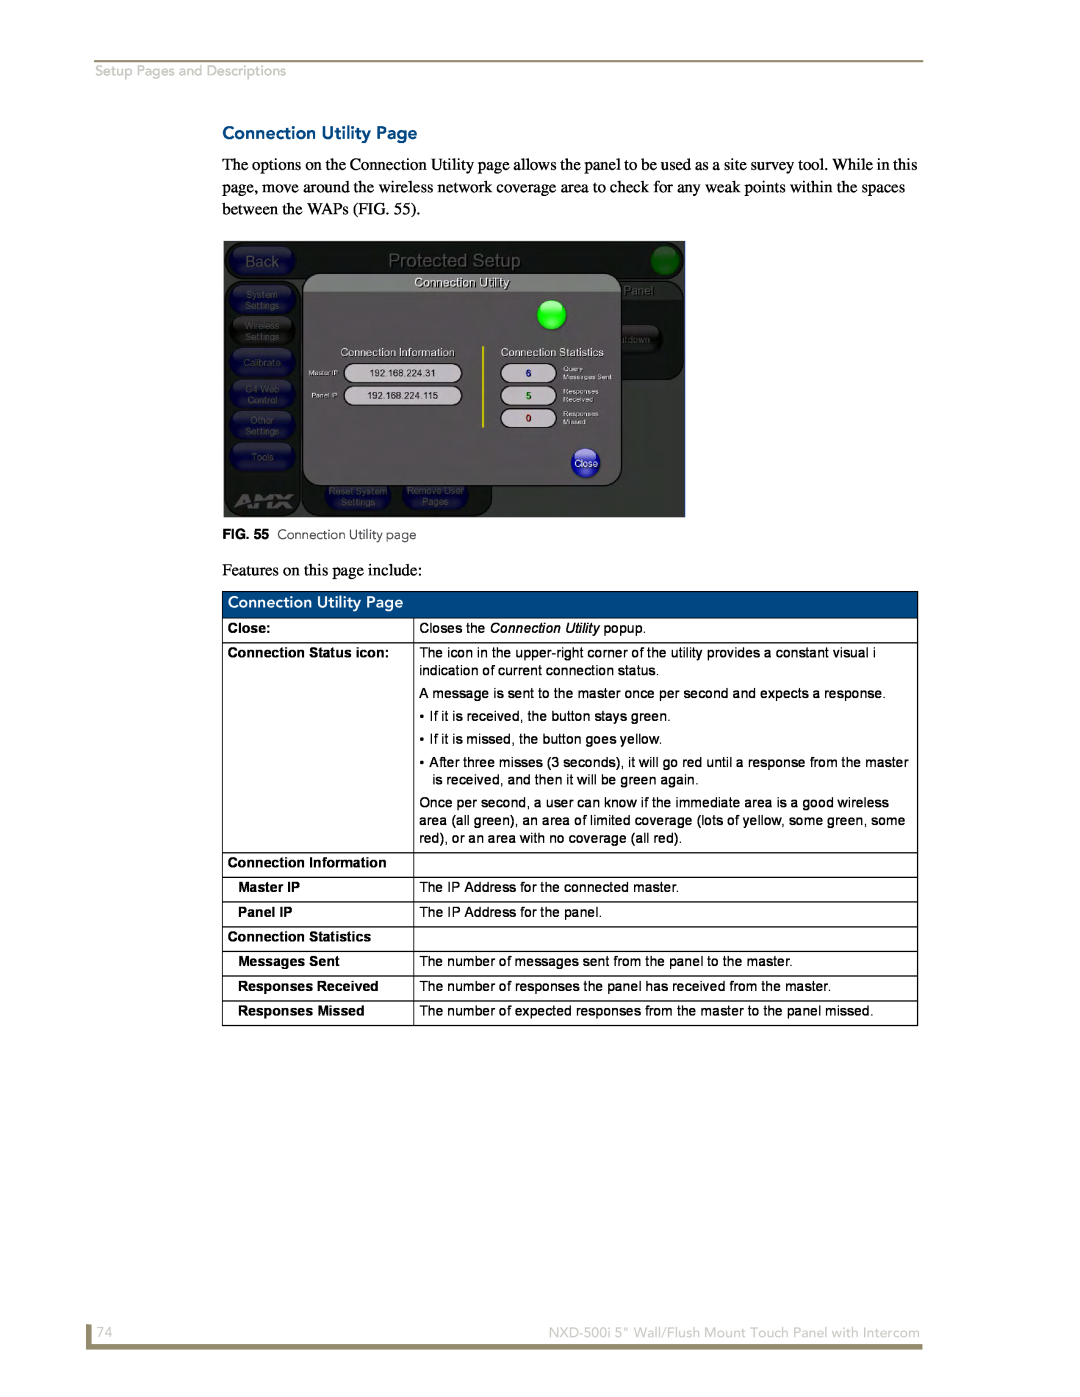 AMX NXD-500i manual Connection Utility Page, Setup Pages and Descriptions, Closes the Connection Utility popup 